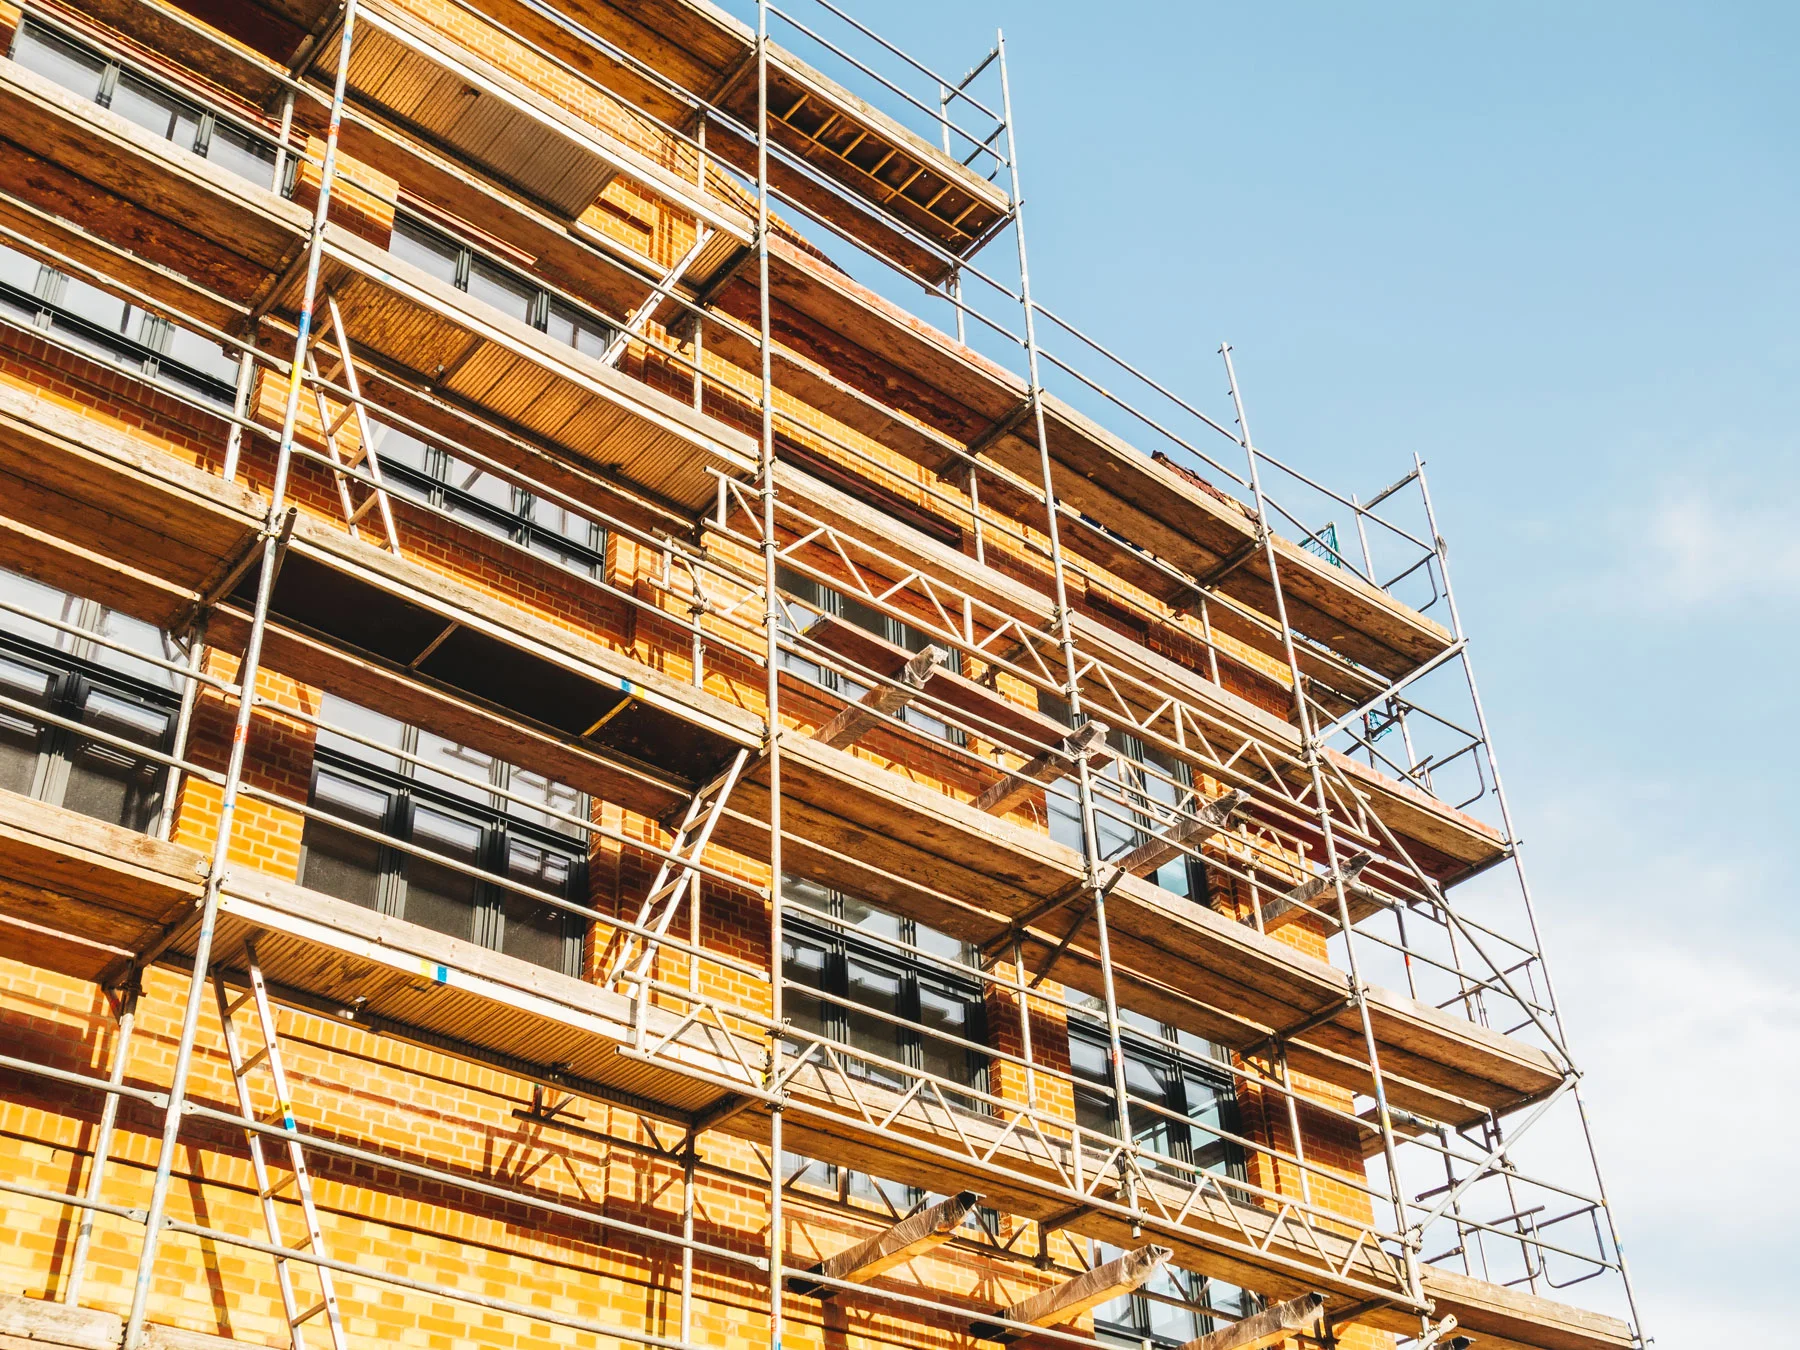 Where To Find Professional Scaffolding Services?